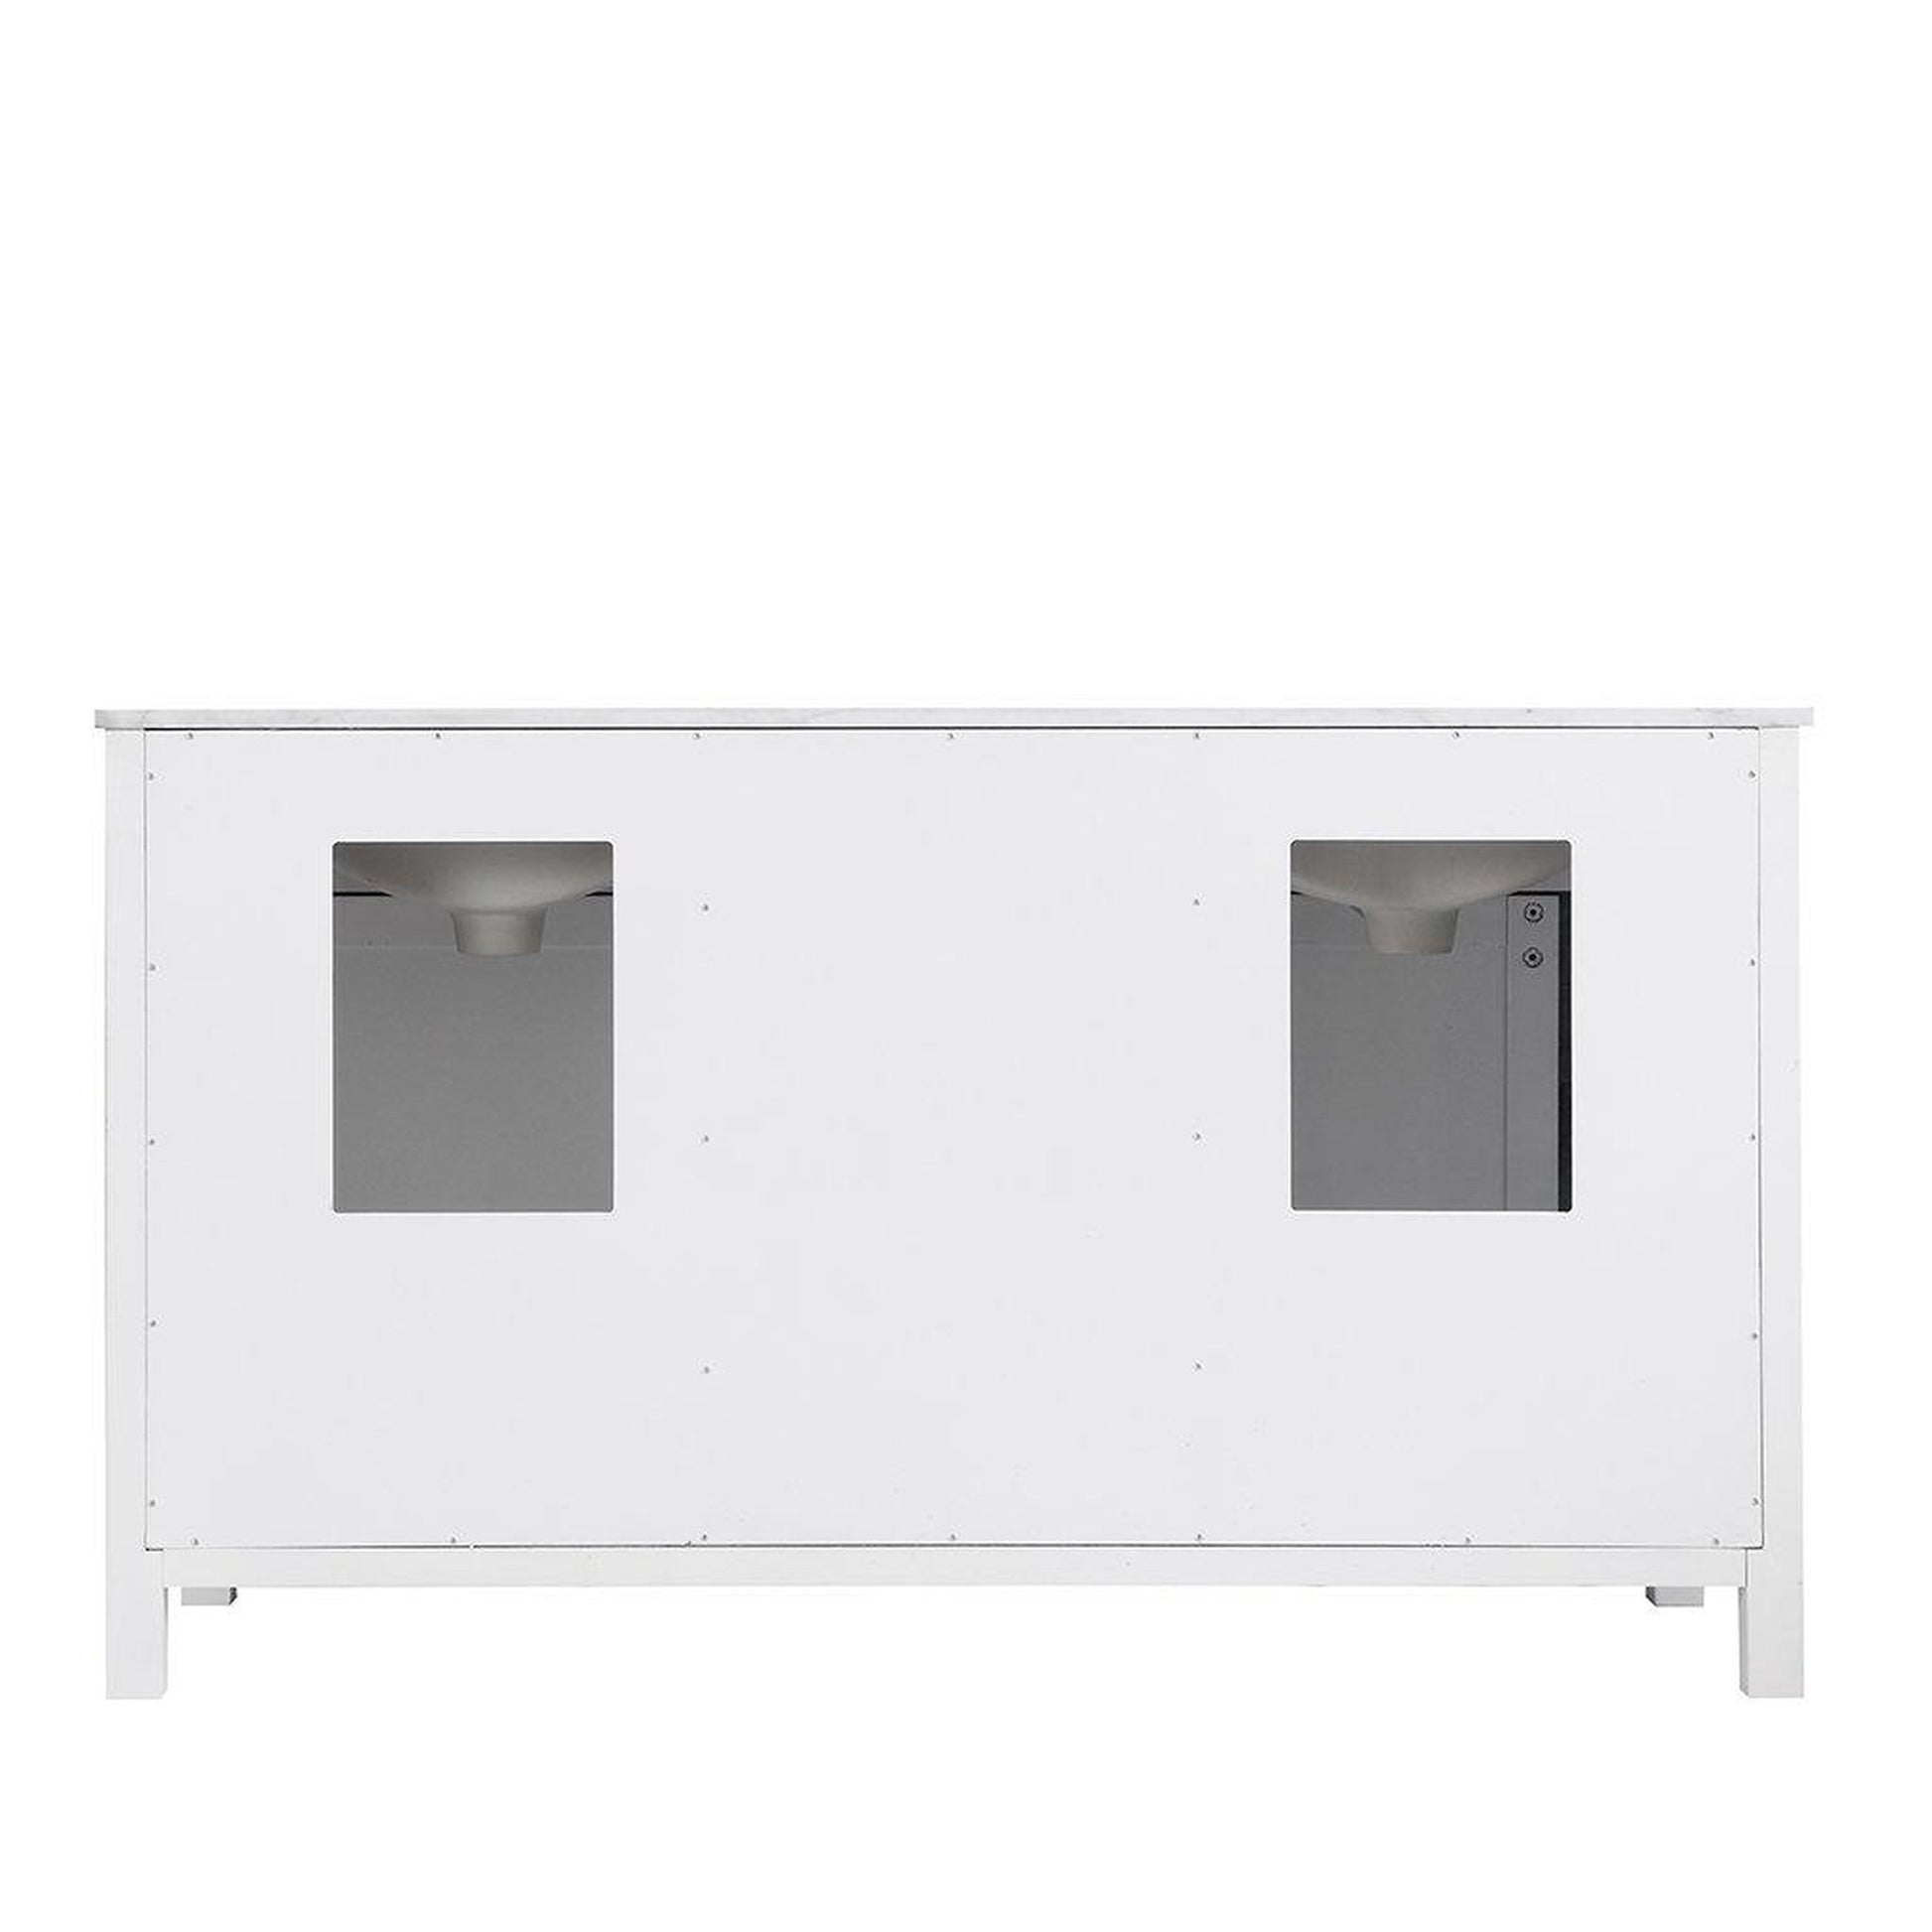 Altair Kinsley 60" Double White Freestanding Bathroom Vanity Set With Natural Carrara White Marble Top, Two Rectangular Undermount Ceramic Sinks, and Overflow